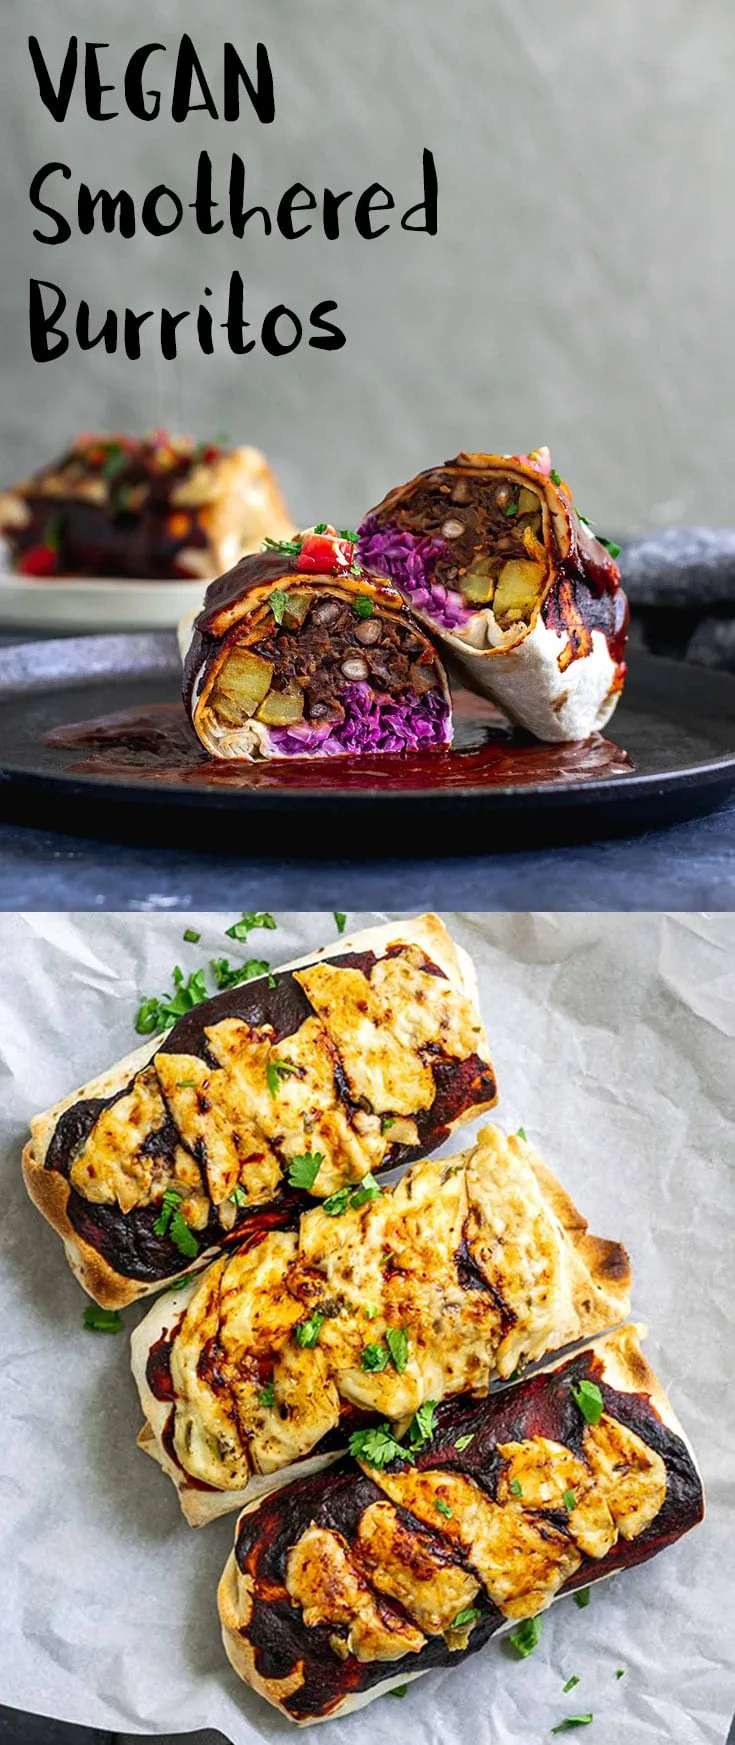 Burritos are filled with homestyle potatoes, cabbage slaw, and delicious easy refried black beans, then smothered with Mexican red chile sauce and vegan cheese and baked until hot. | thecuriouschickpea.com